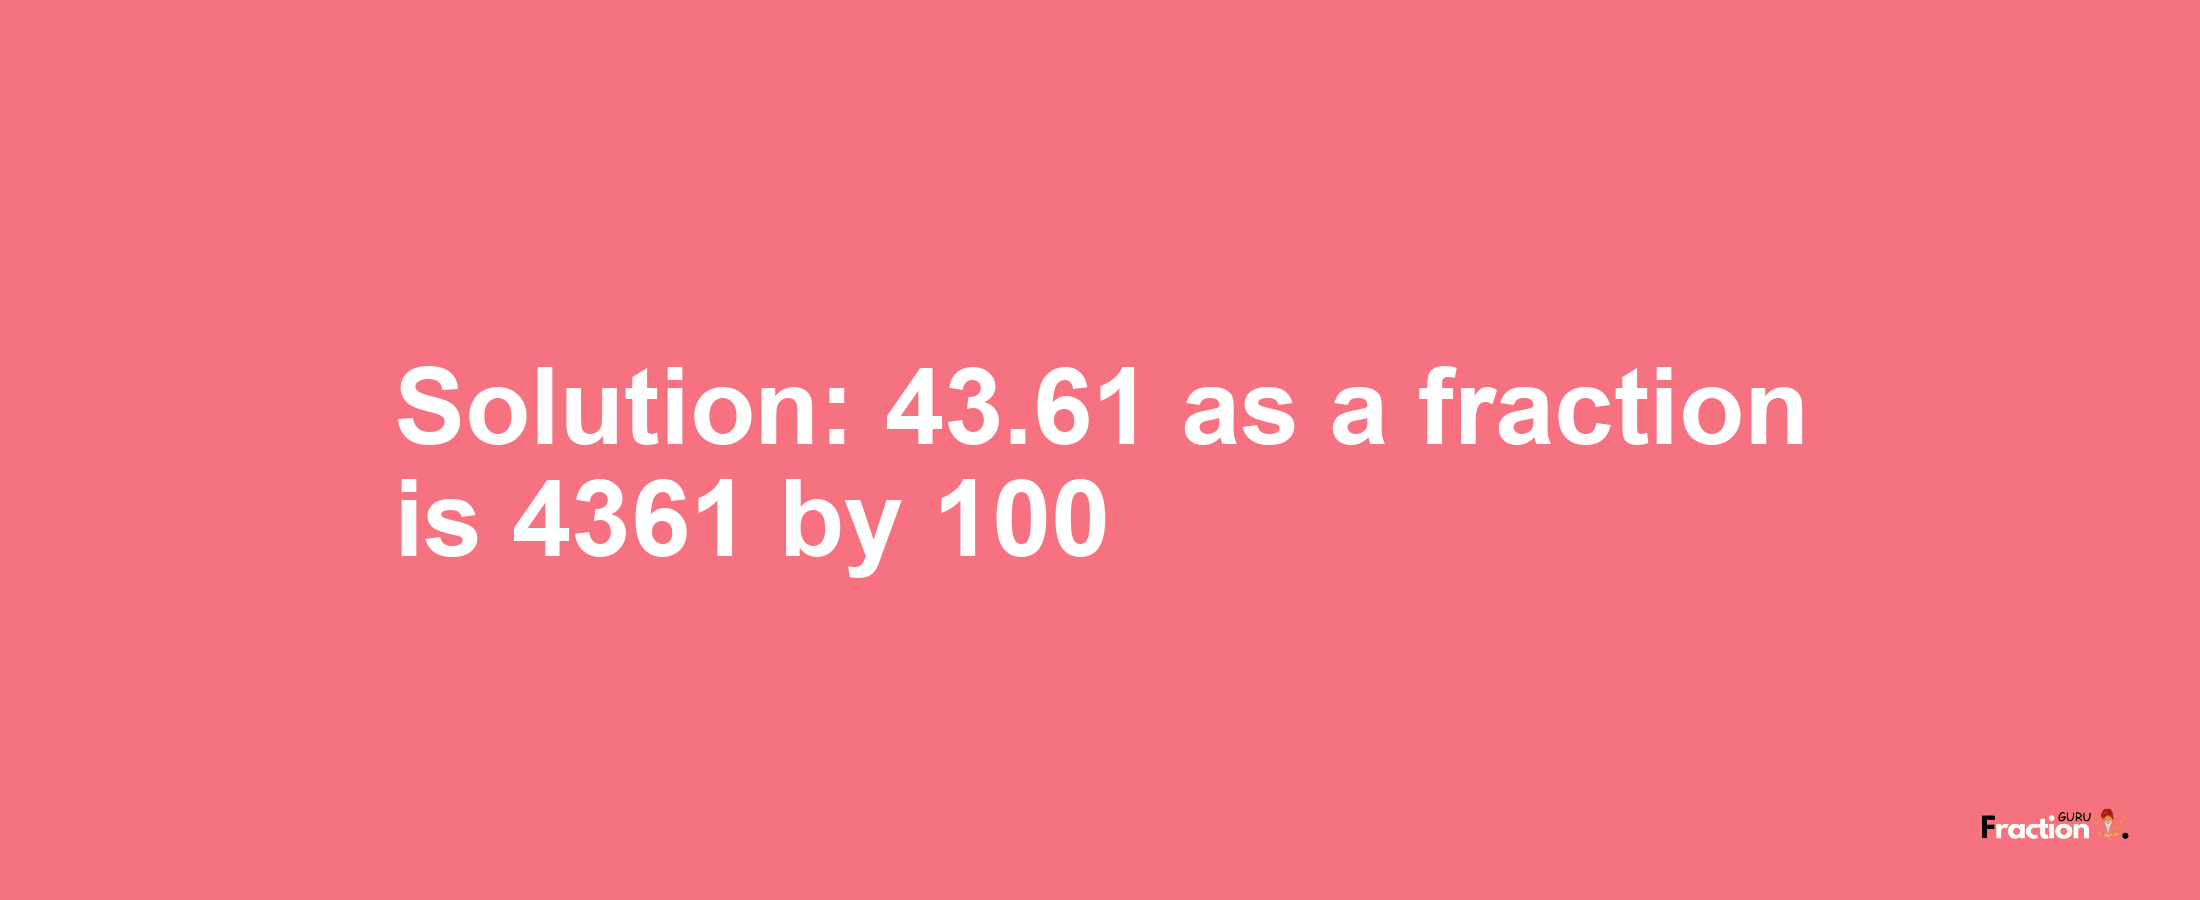 Solution:43.61 as a fraction is 4361/100